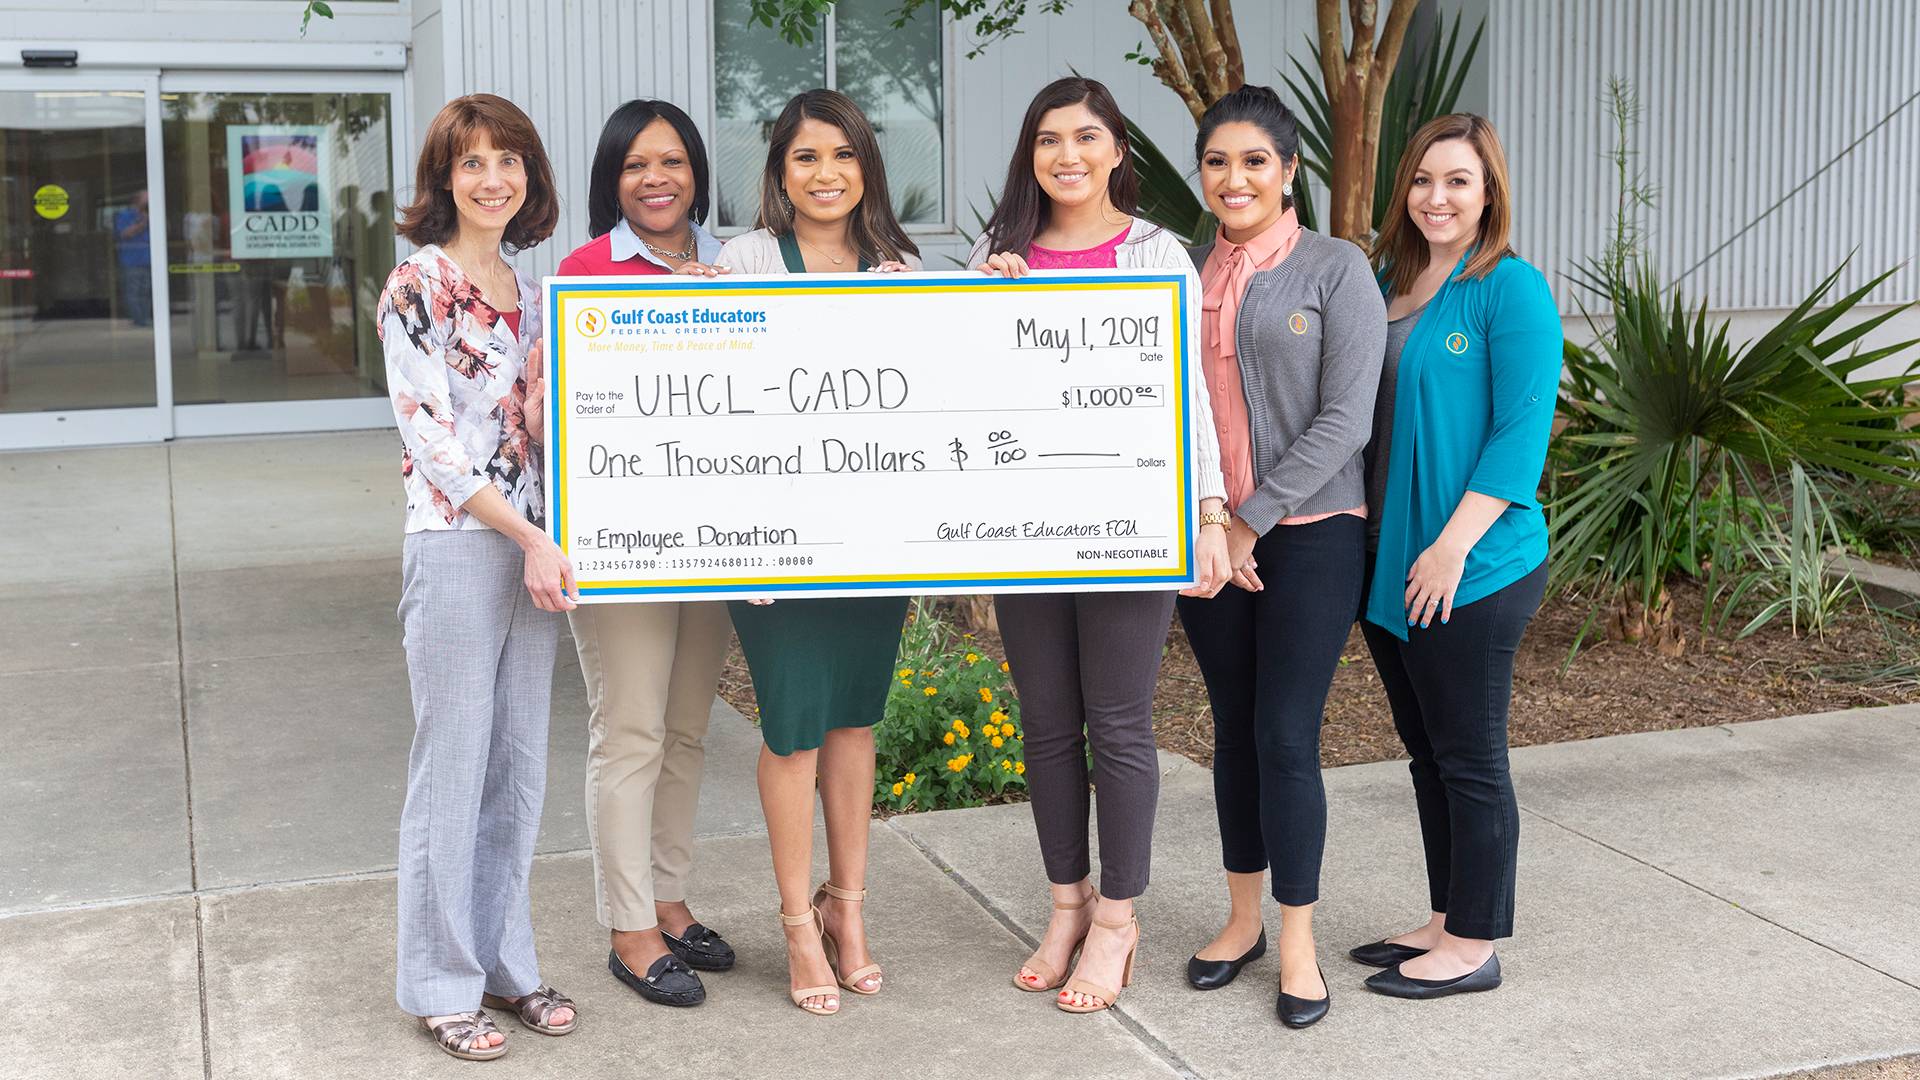 Local credit union continues tradition of giving to UHCL autism center